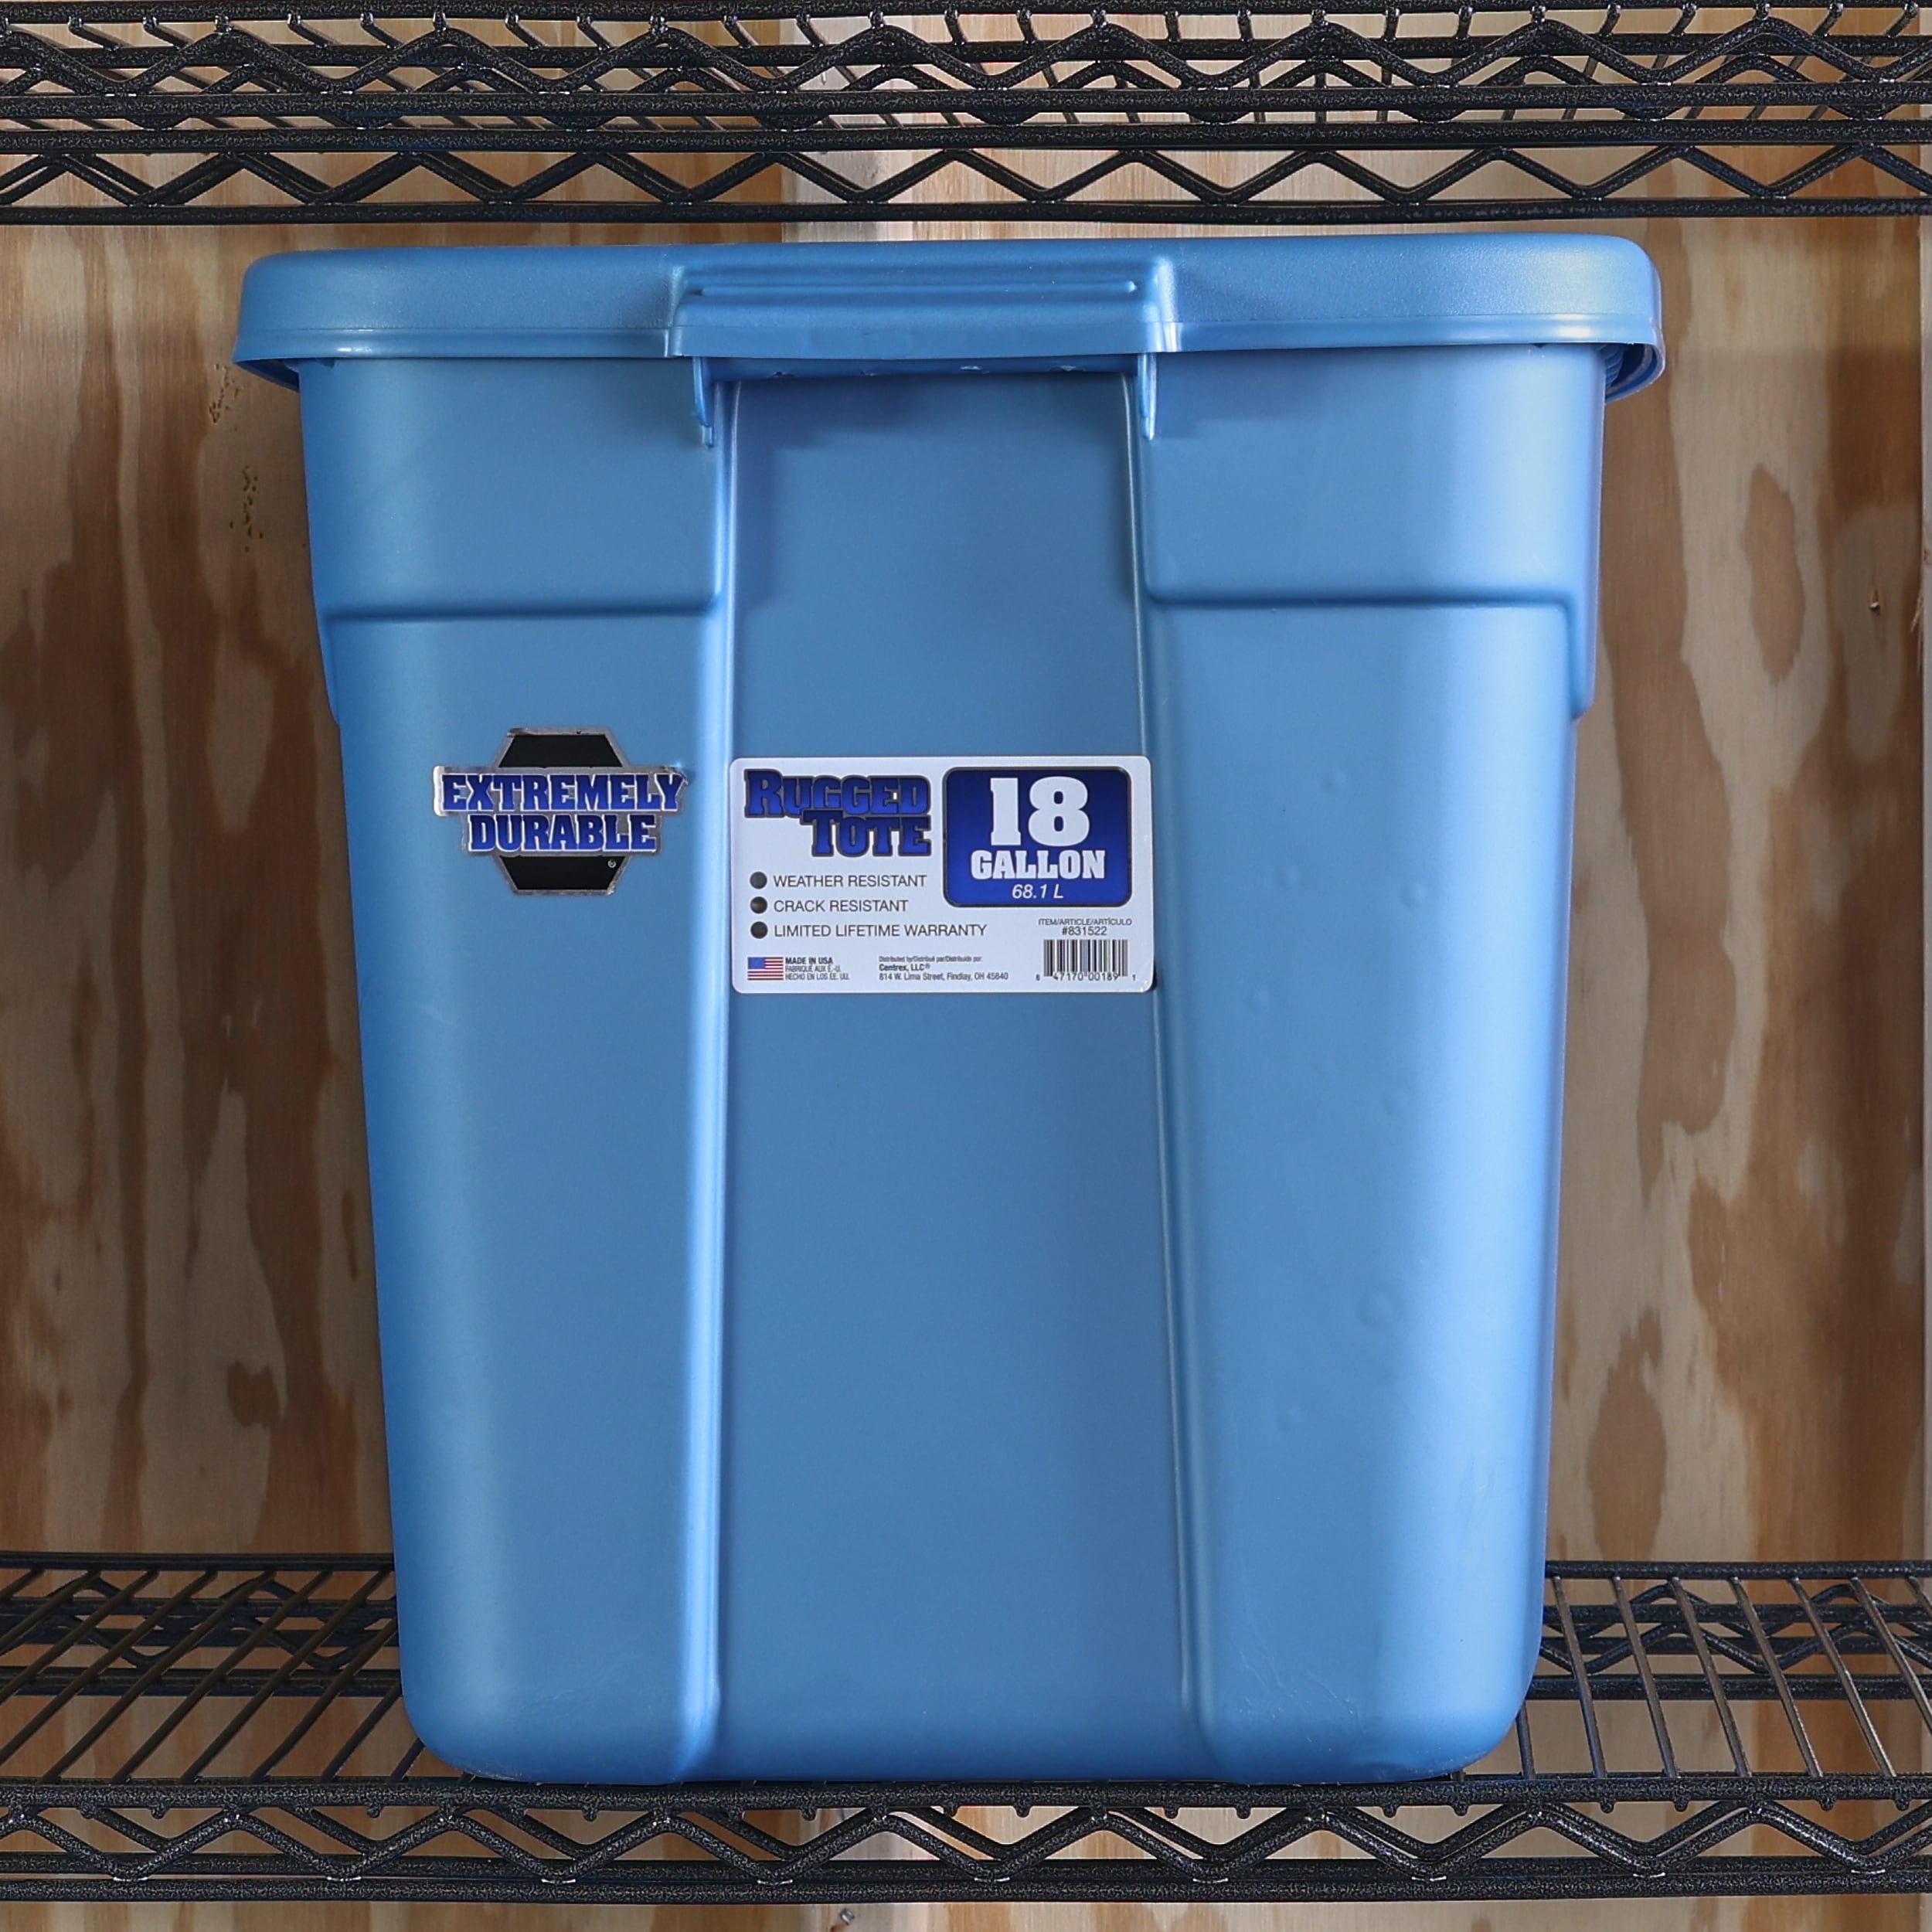 18-Gallon Industrial Plastic Tote with Hinged Lids, Blue - Heavy-Duty Large  27 L x 17 W x 12 H Container buy in stock in U.S. in IDL Packaging